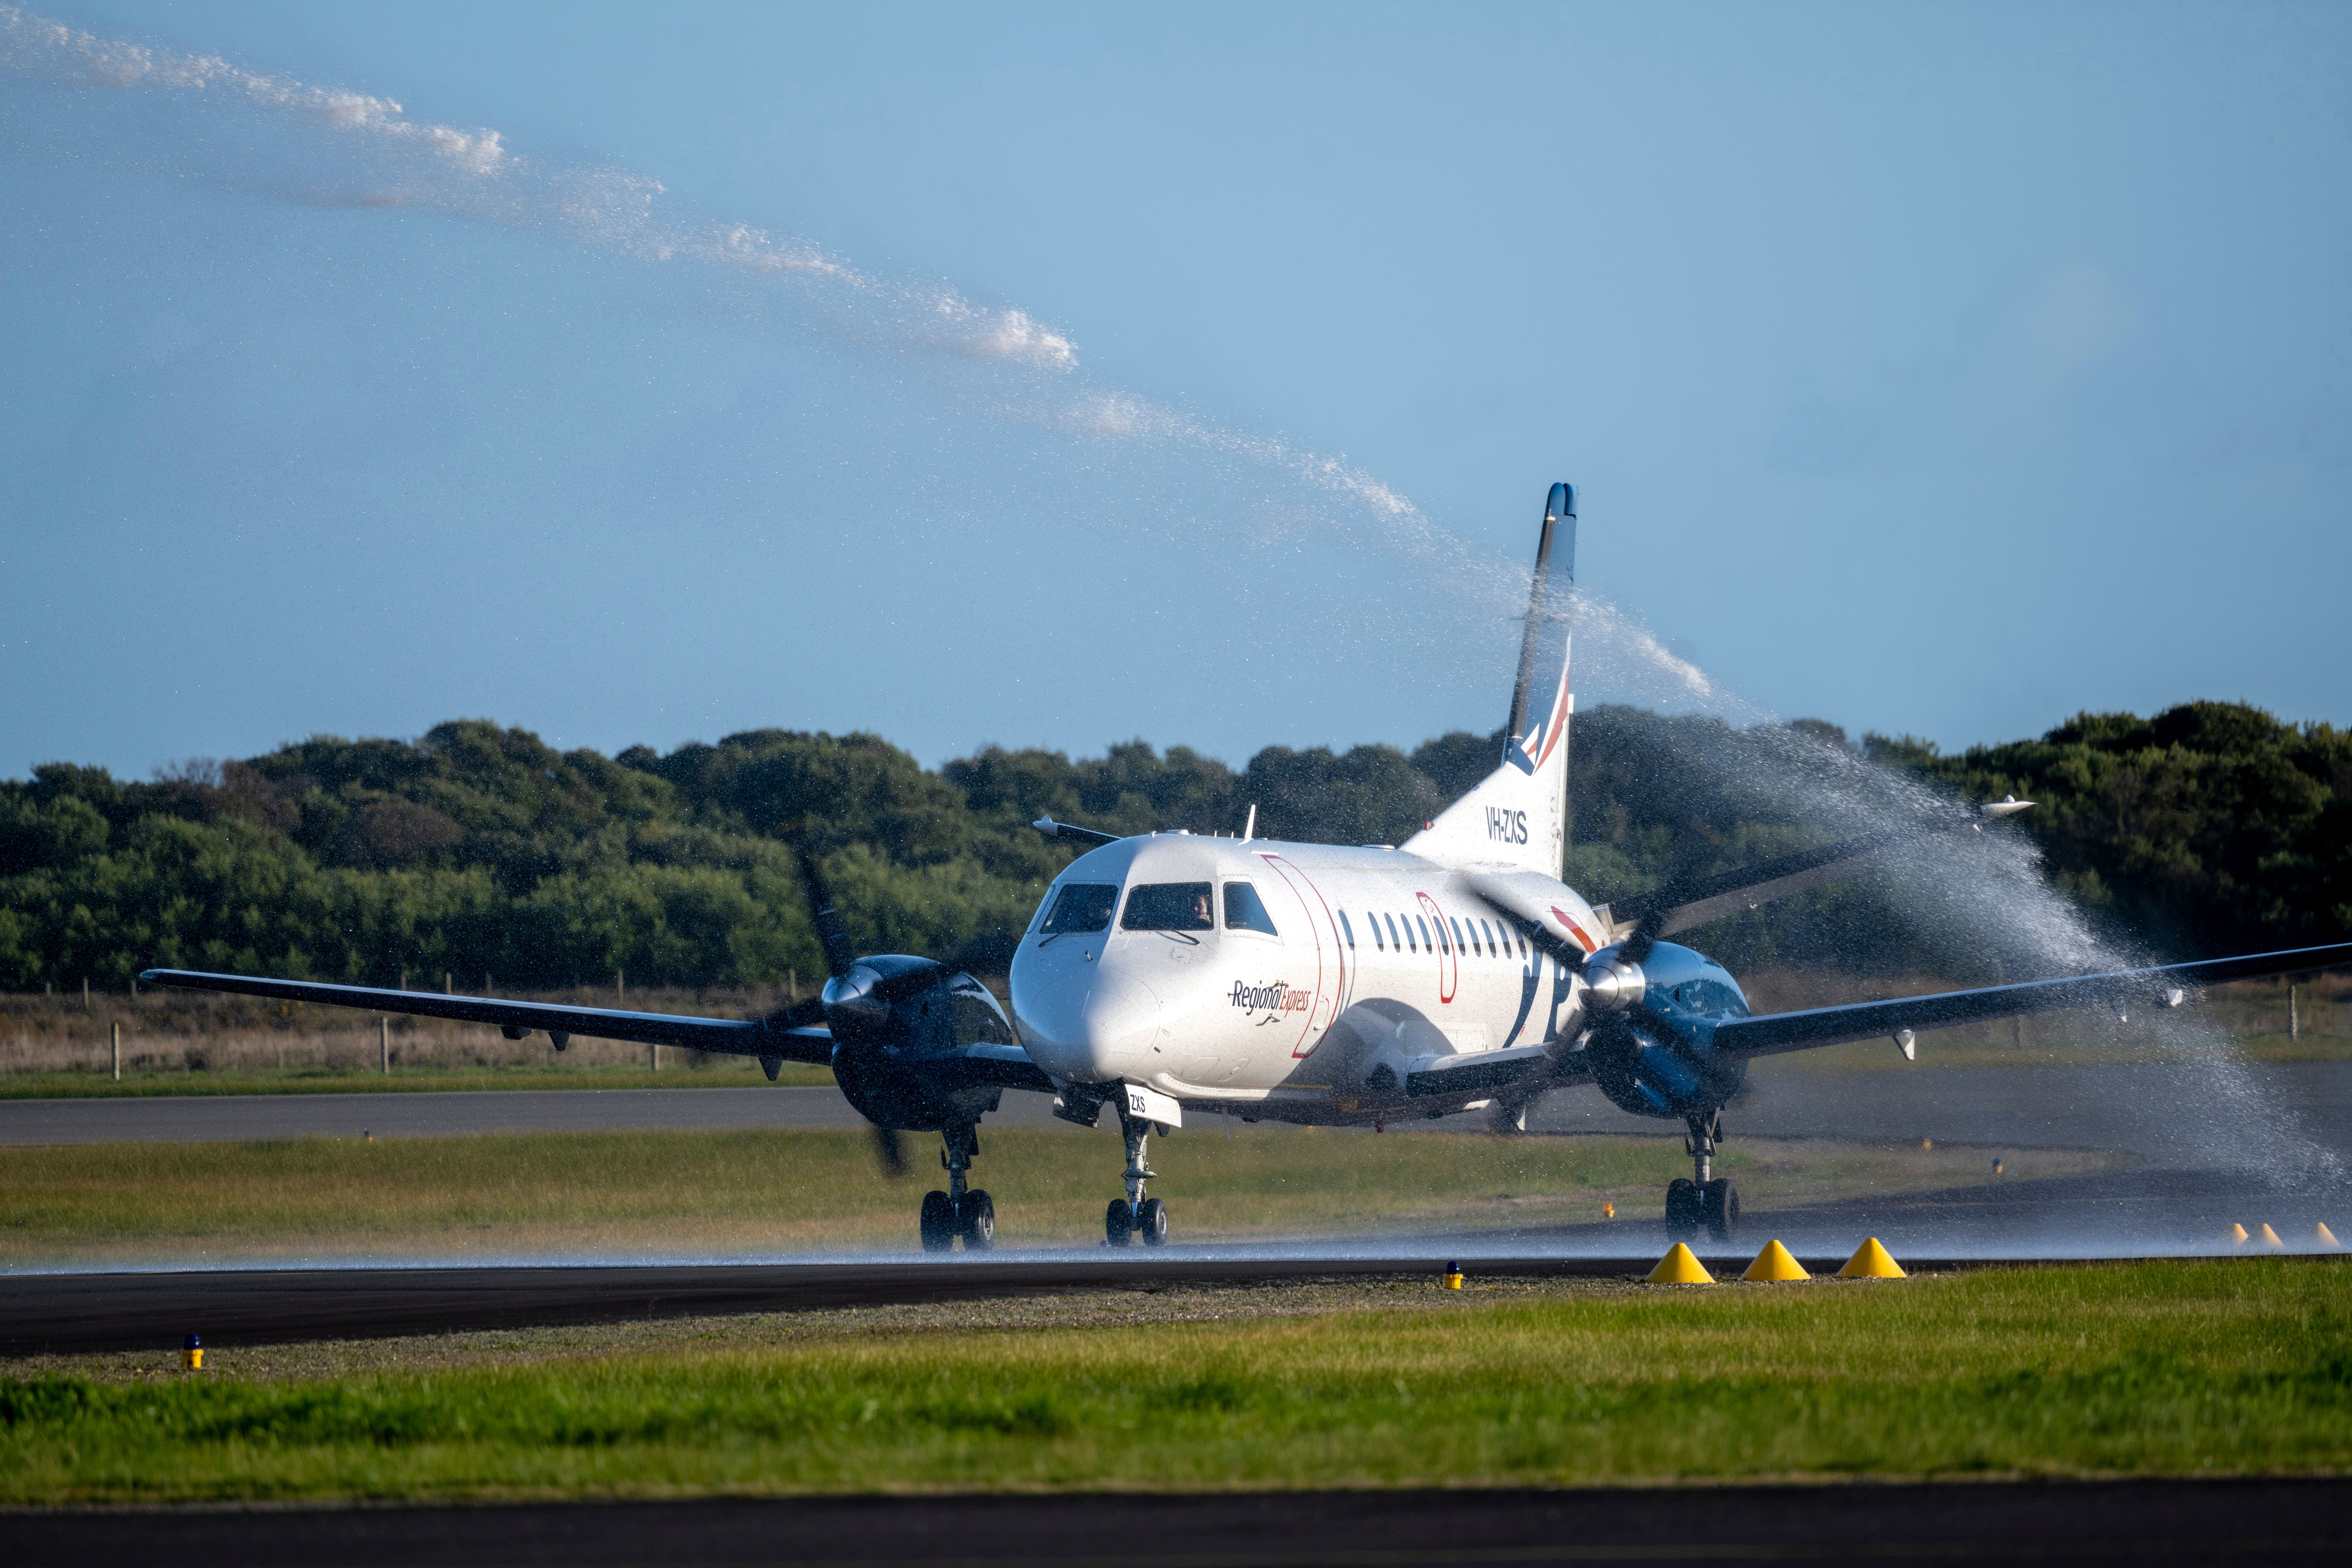 A Saab 340B from Rex landing in Devonport, Tasmania, and receiving a traditional water cannon salute.